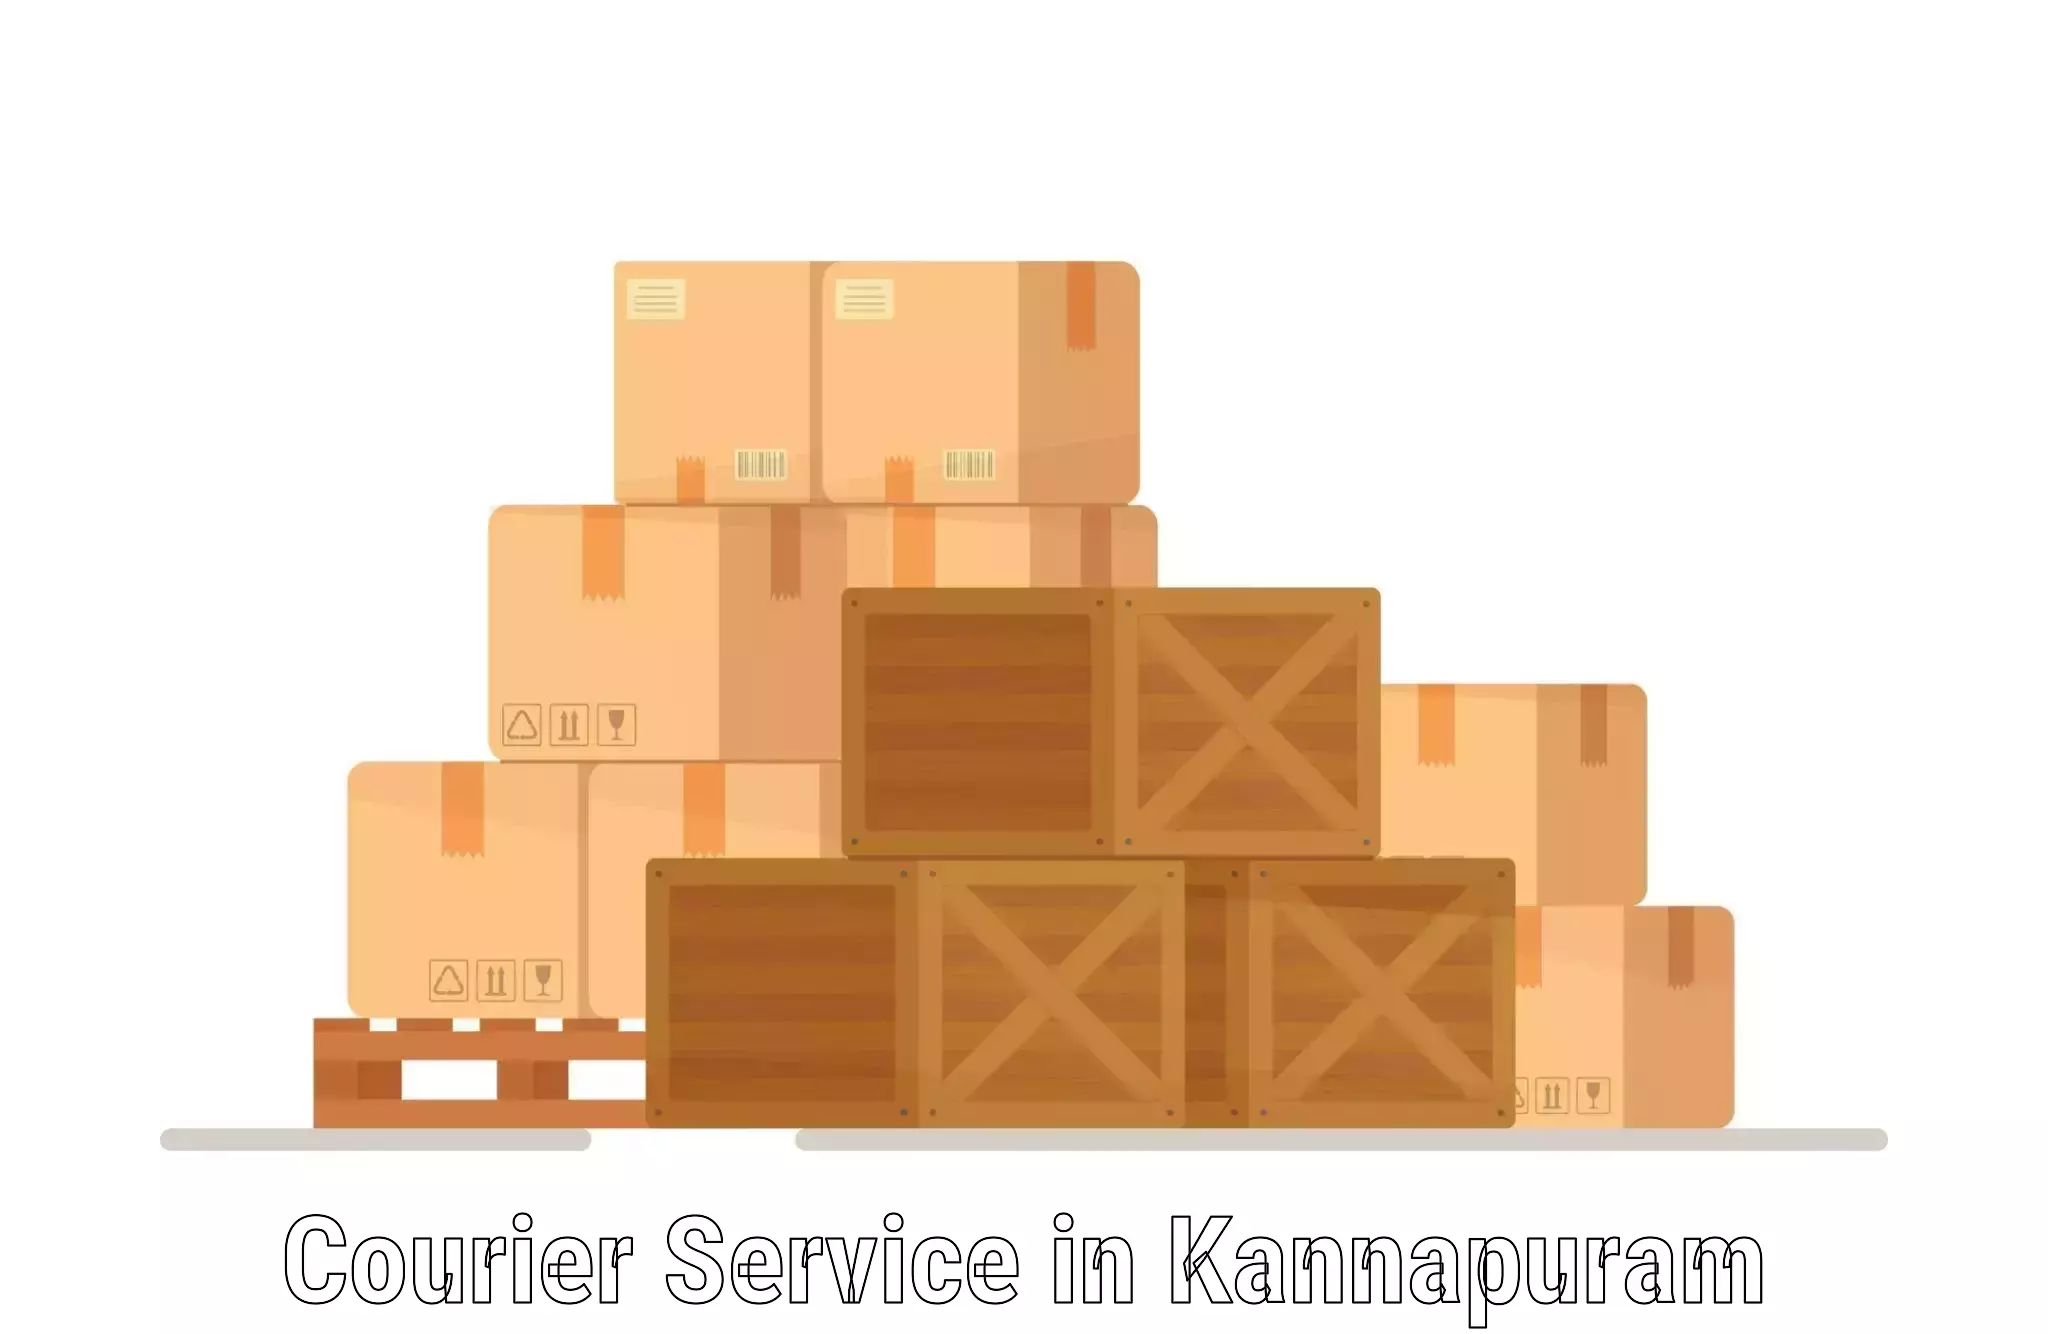 Reliable shipping solutions in Kannapuram